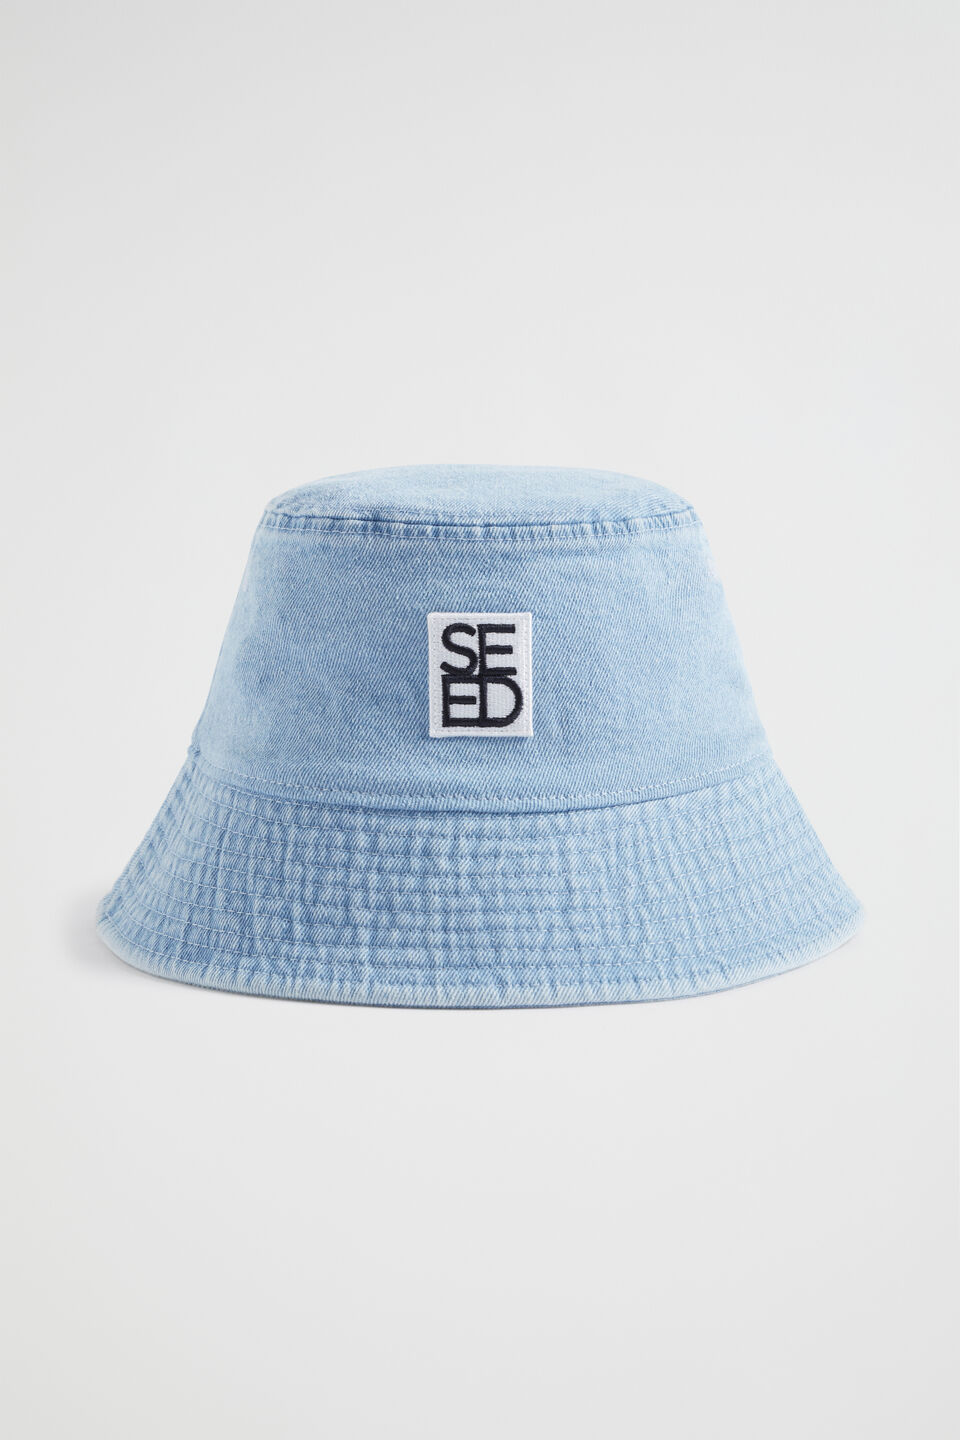 Seed Patch Bucket Hat  Chambray